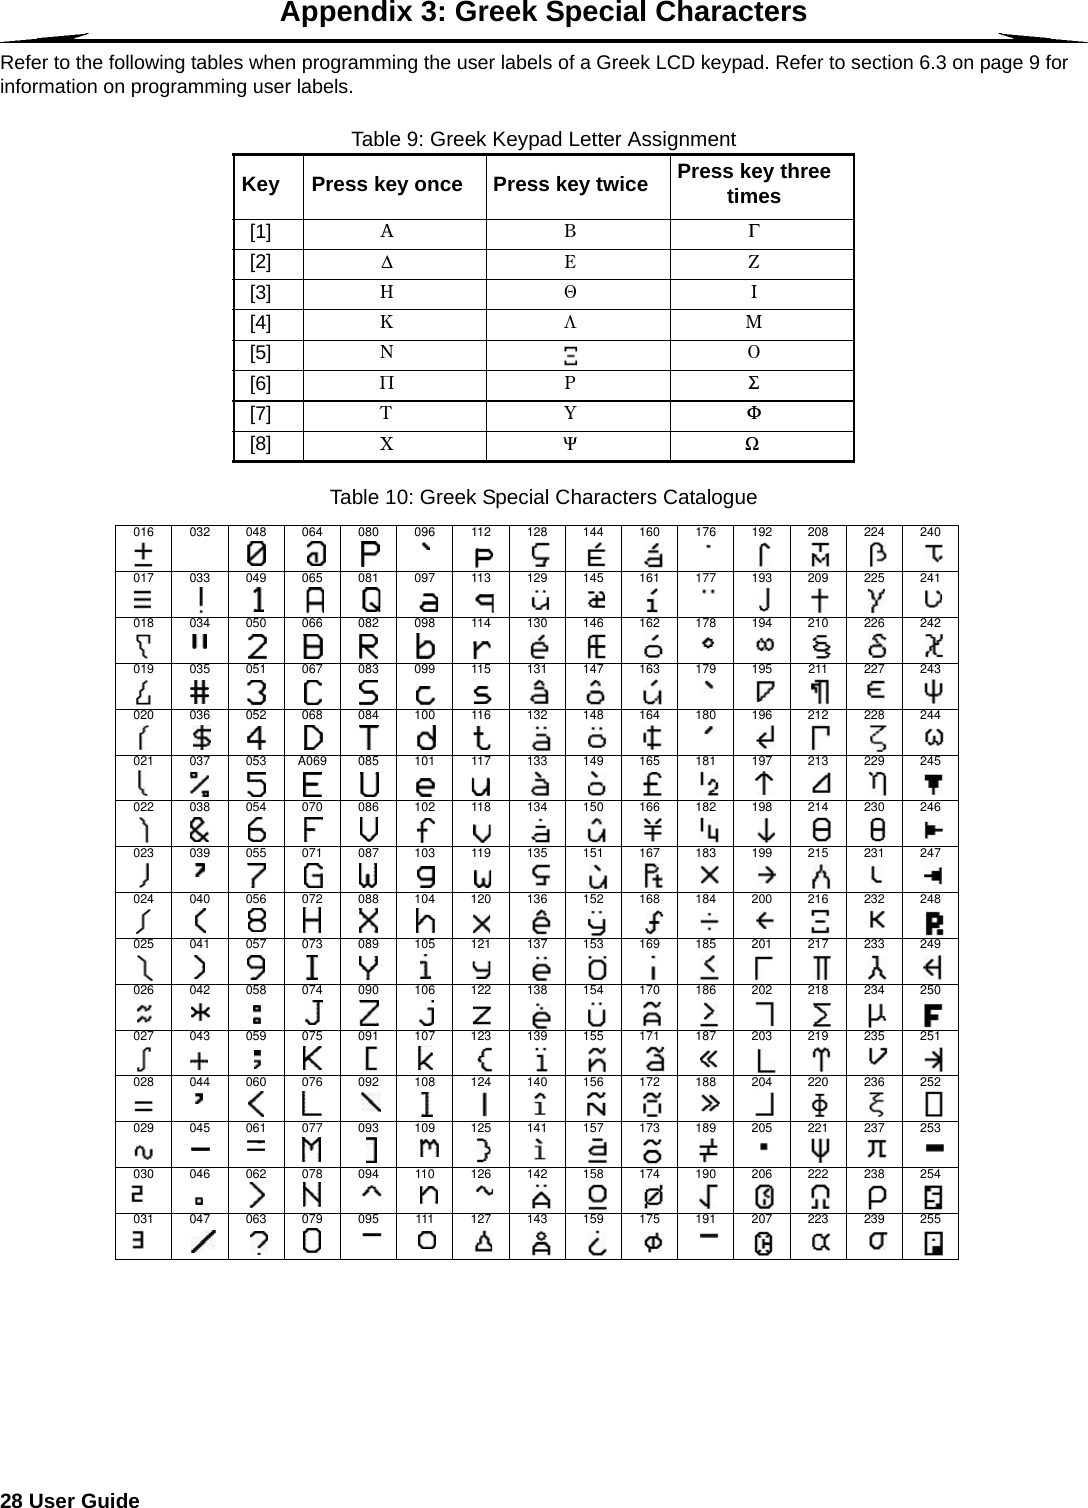 28 User Guide  Appendix 3: Greek Special CharactersRefer to the following tables when programming the user labels of a Greek LCD keypad. Refer to section 6.3 on page 9 for information on programming user labels.Table 9: Greek Keypad Letter AssignmentTable 10: Greek Special Characters CatalogueKey Press key once Press key twice Press key three times[1] #$)[2] &amp;&apos;&lt;[3] *3 +[4] -./[5] 01[6] 245[7] 67([8] %;9016 032 048 064 080 096 112 128 144 160 176 192 208 224 240017 033 049 065 081 097 113 129 145 161 177 193 209 225 241018 034 050 066 082 098 114 130 146 162 178 194 210 226 242019 035 051 067 083 099 115 131 147 163 179 195 211 227 243020 036 052 068 084 100 116 132 148 164 180 196 212 228 244021 037 053 A069 085 101 117 133 149 165 181 197 213 229 245022 038 054 070 086 102 118 134 150 166 182 198 214 230 246023 039 055 071 087 103 119 135 151 167 183 199 215 231 247024 040 056 072 088 104 120 136 152 168 184 200 216 232 248025 041 057 073 089 105 121 137 153 169 185 201 217 233 249026 042 058 074 090 106 122 138 154 170 186 202 218 234 250027 043 059 075 091 107 123 139 155 171 187 203 219 235 251028 044 060 076 092 108 124 140 156 172 188 204 220 236 252029 045 061 077 093 109 125 141 157 173 189 205 221 237 253030 046 062 078 094 110 126 142 158 174 190 206 222 238 254031 047 063 079 095 111 127 143 159 175 191 207 223 239 255